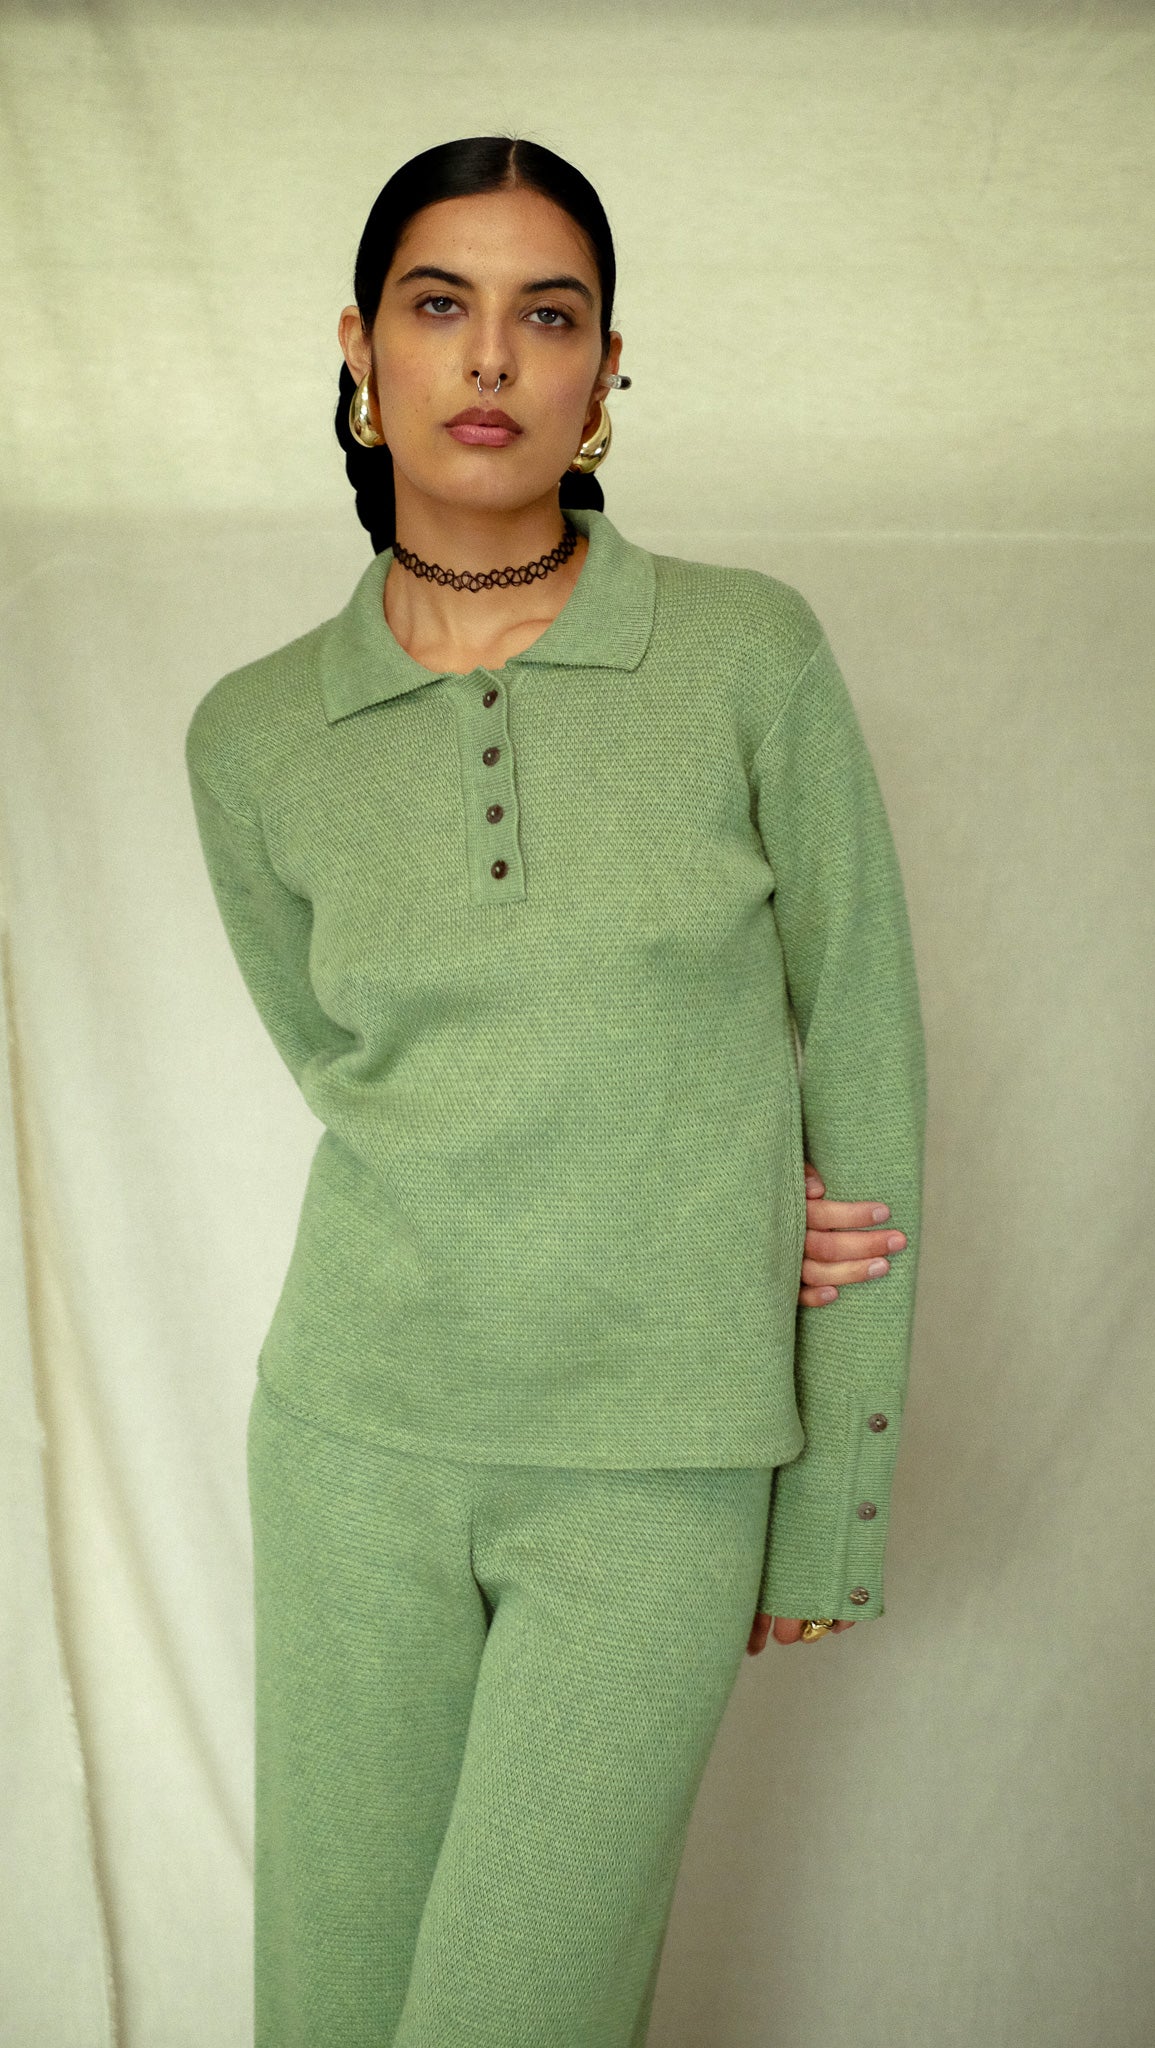 Moira Knitted Sweater in Sage- Size Small SAMPLE